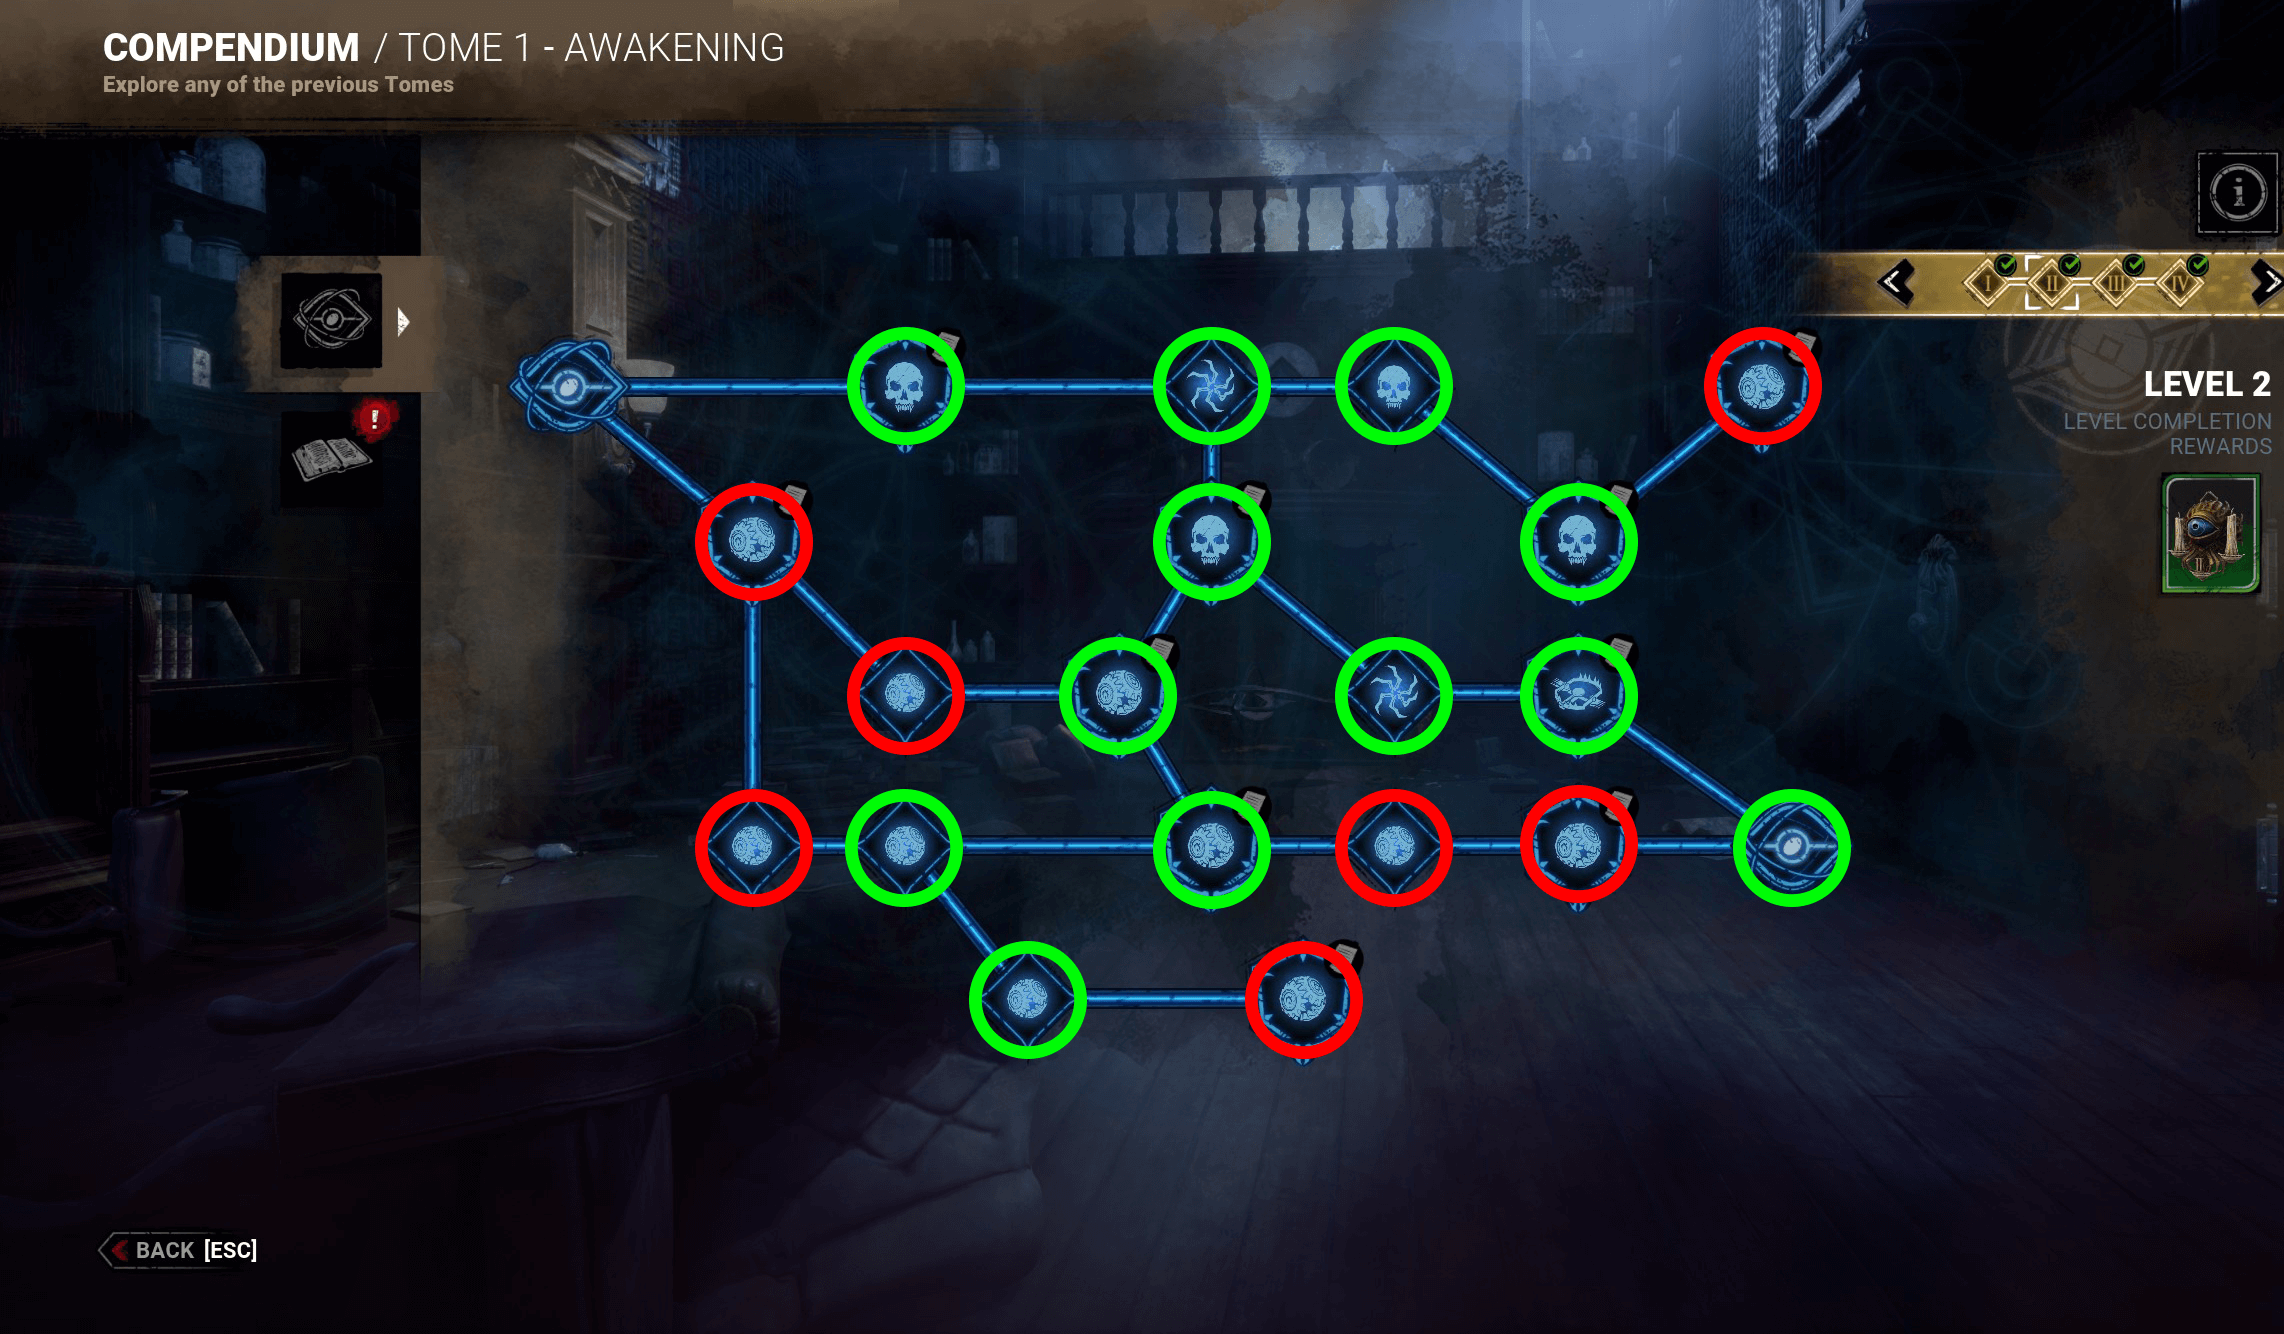 Dead by Daylight WIP - Archive Path to save the most Blood Points - Tome 1 Awakening - 74C5C75